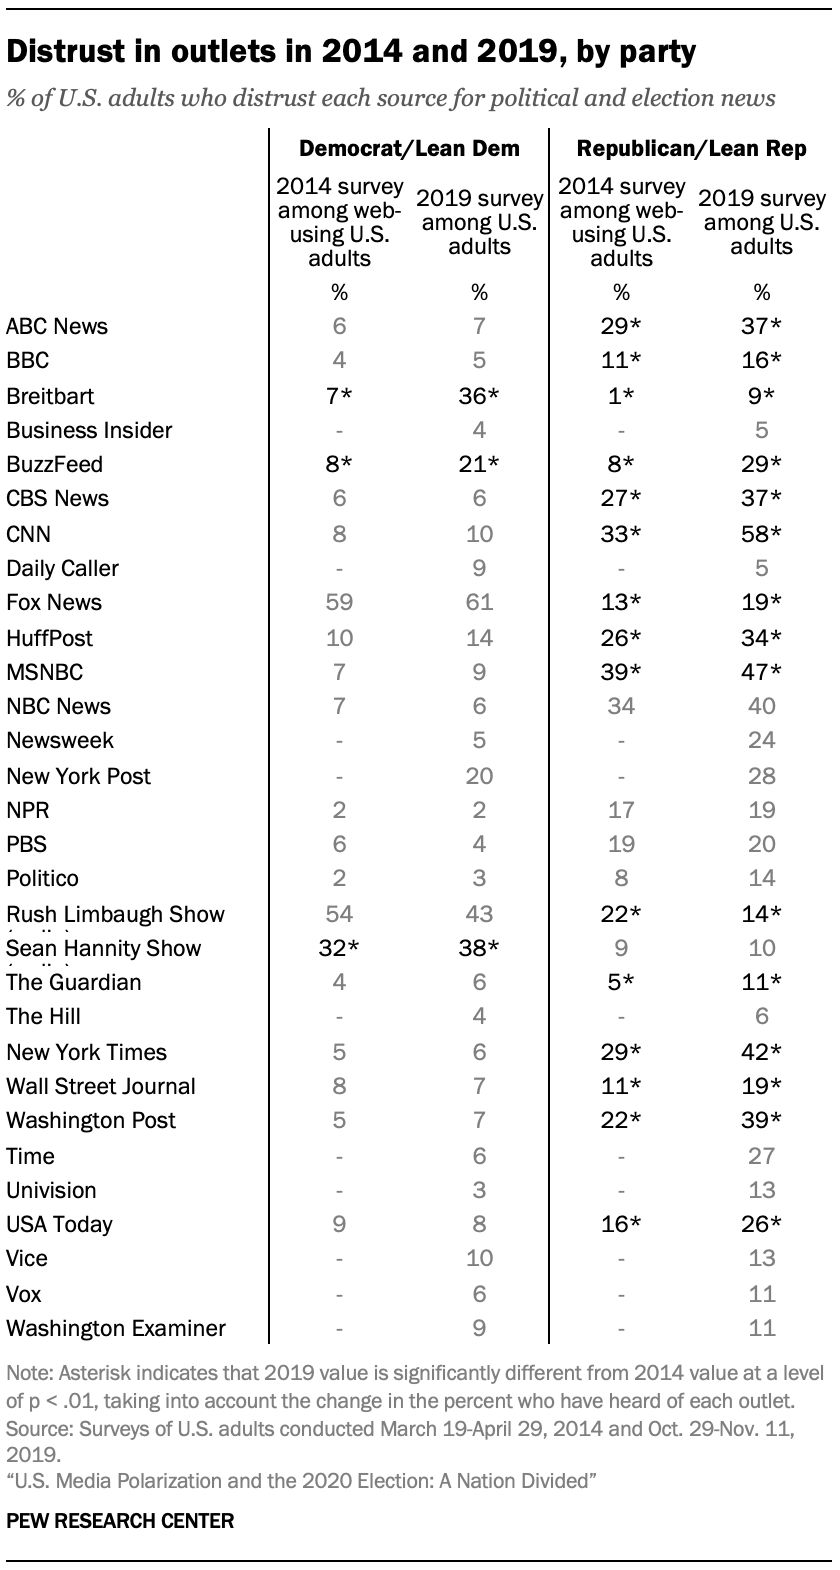 Distrust in outlets in 2014 and 2019, by party